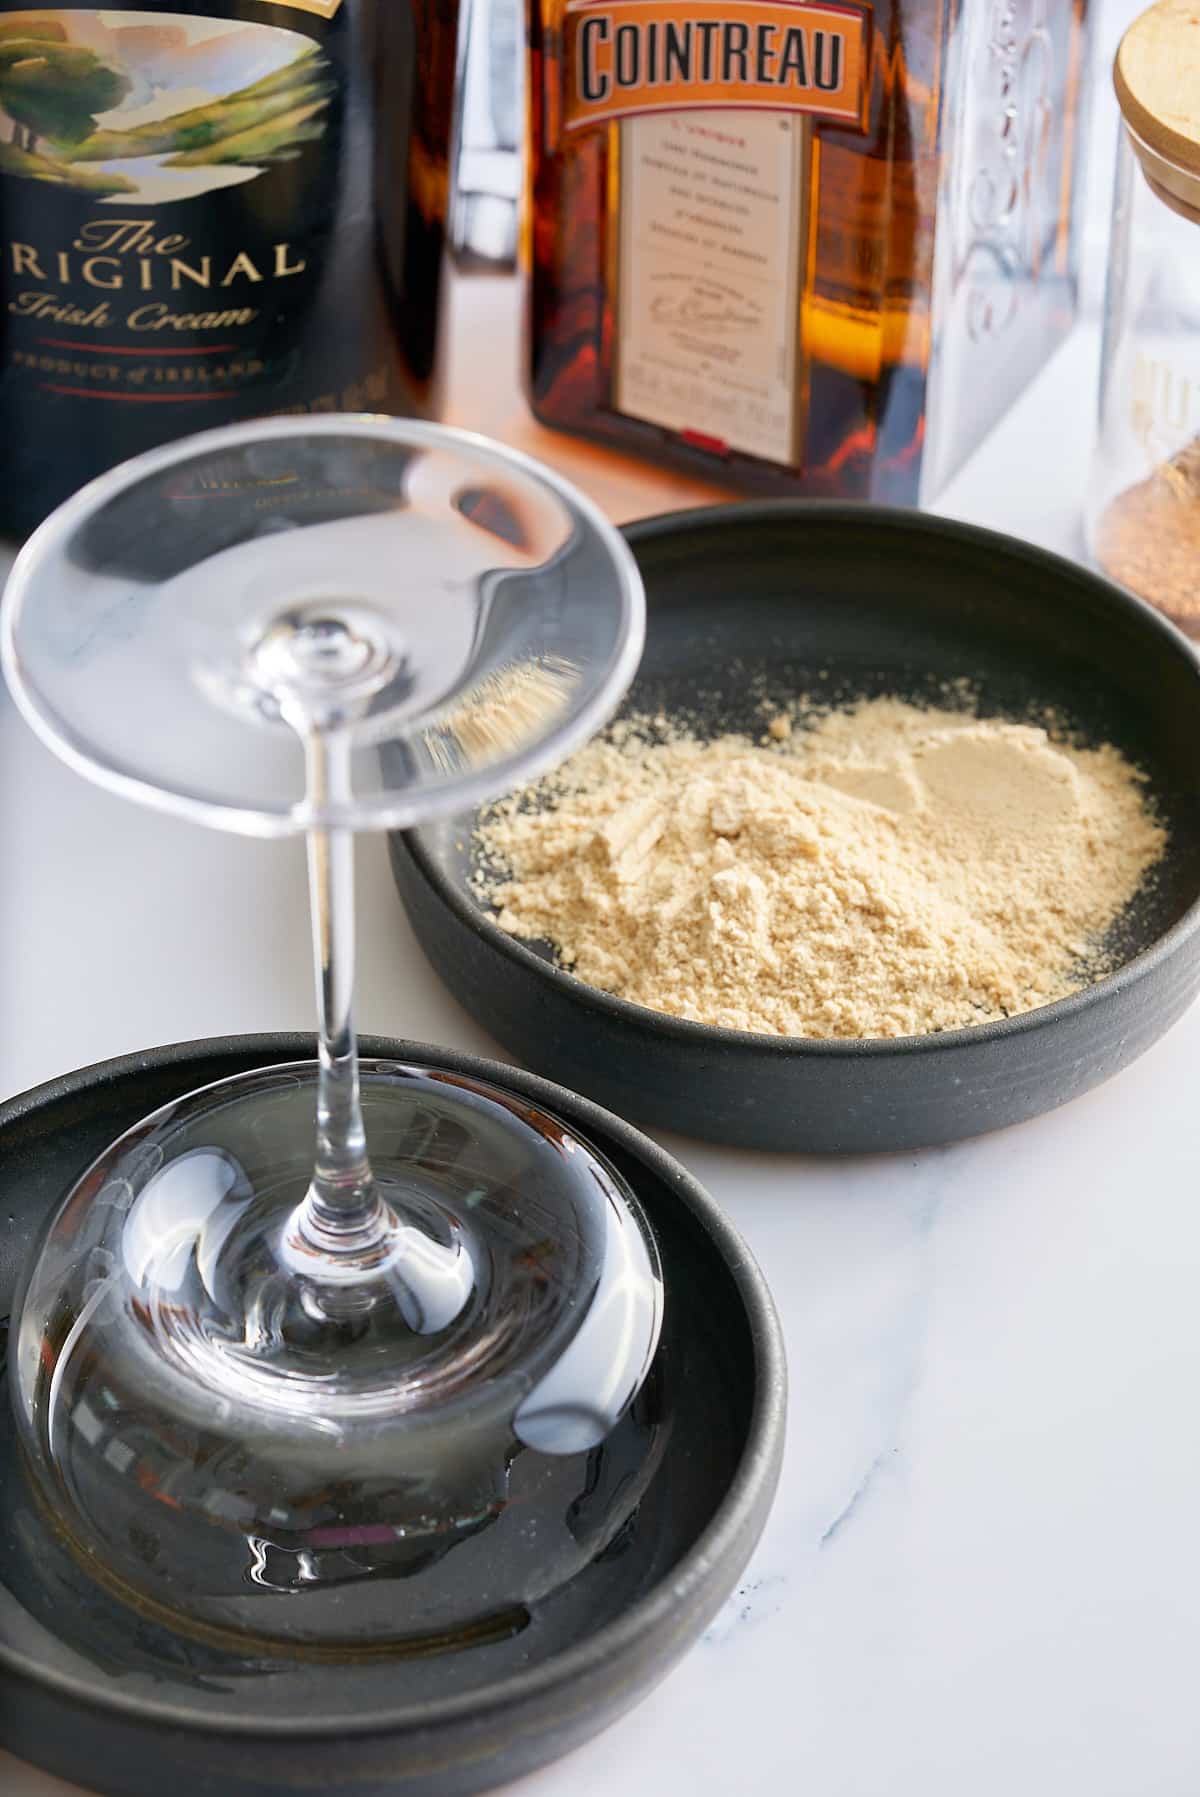 A black dish filled with sugar and Graham cracker crumbs and a second dish filled with whiskey with a glass rim being set into the whiskey.